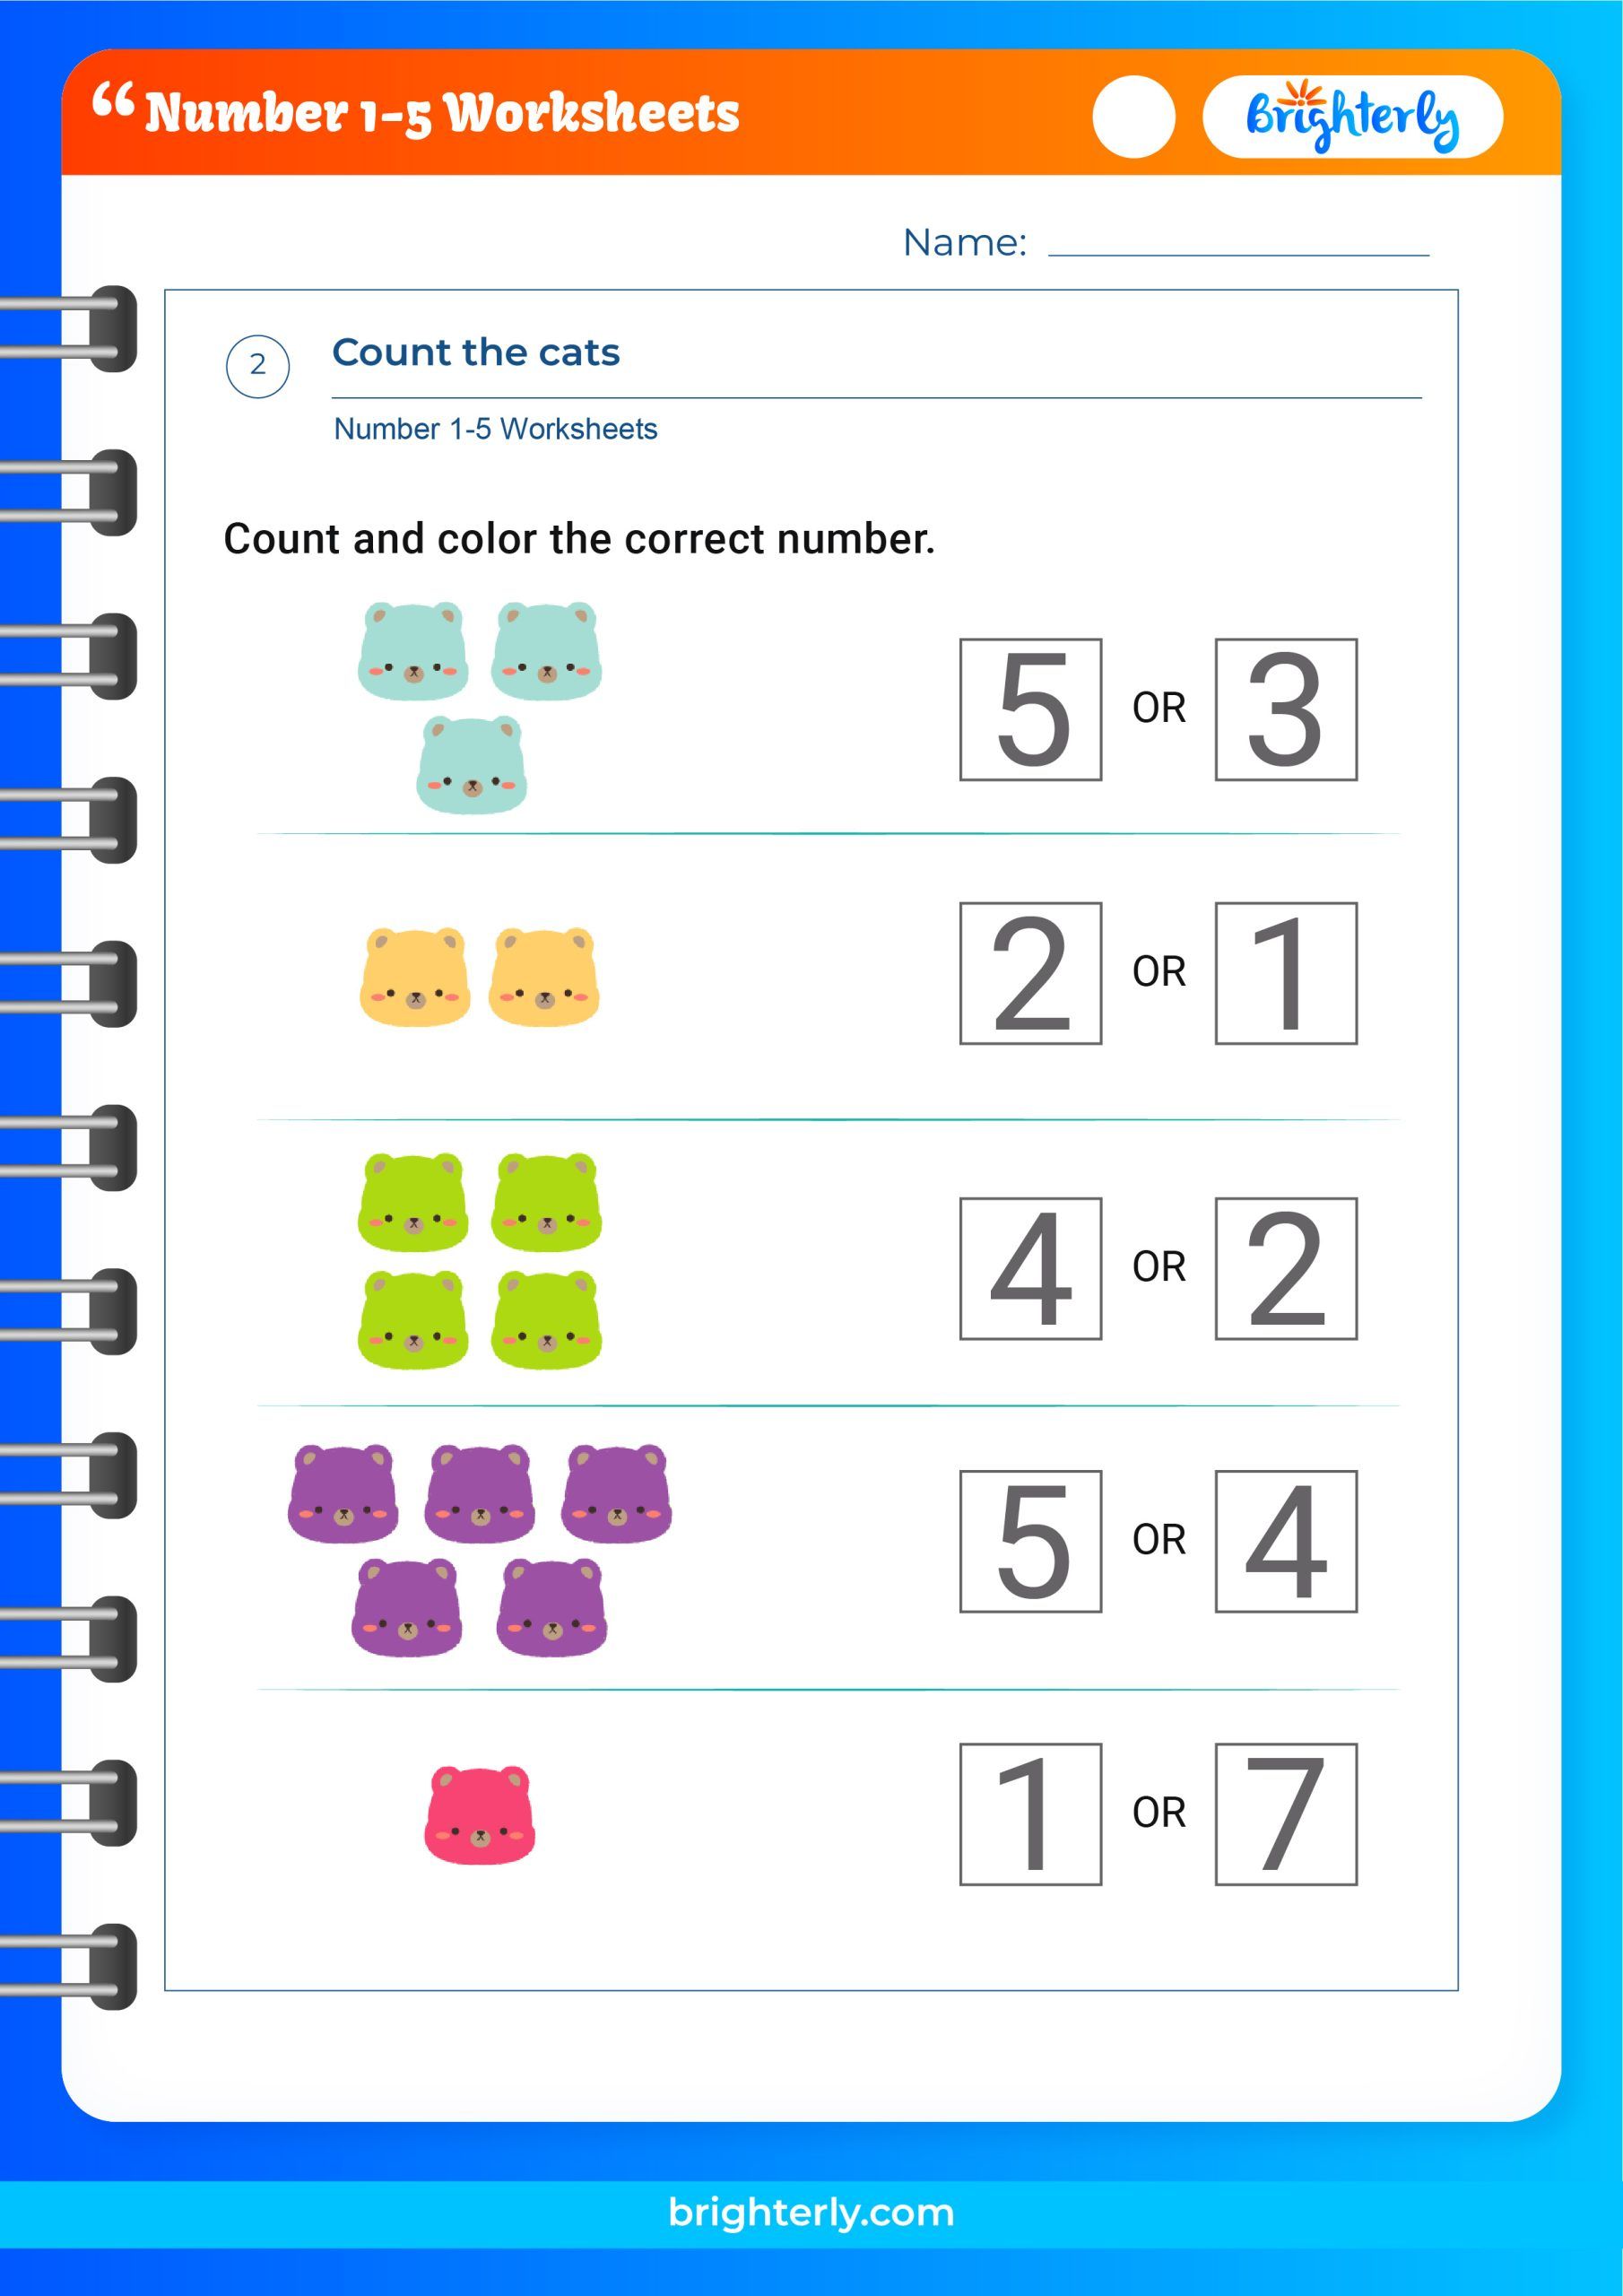 free-printable-number-1-5-worksheets-for-kids-pdfs-brighterly